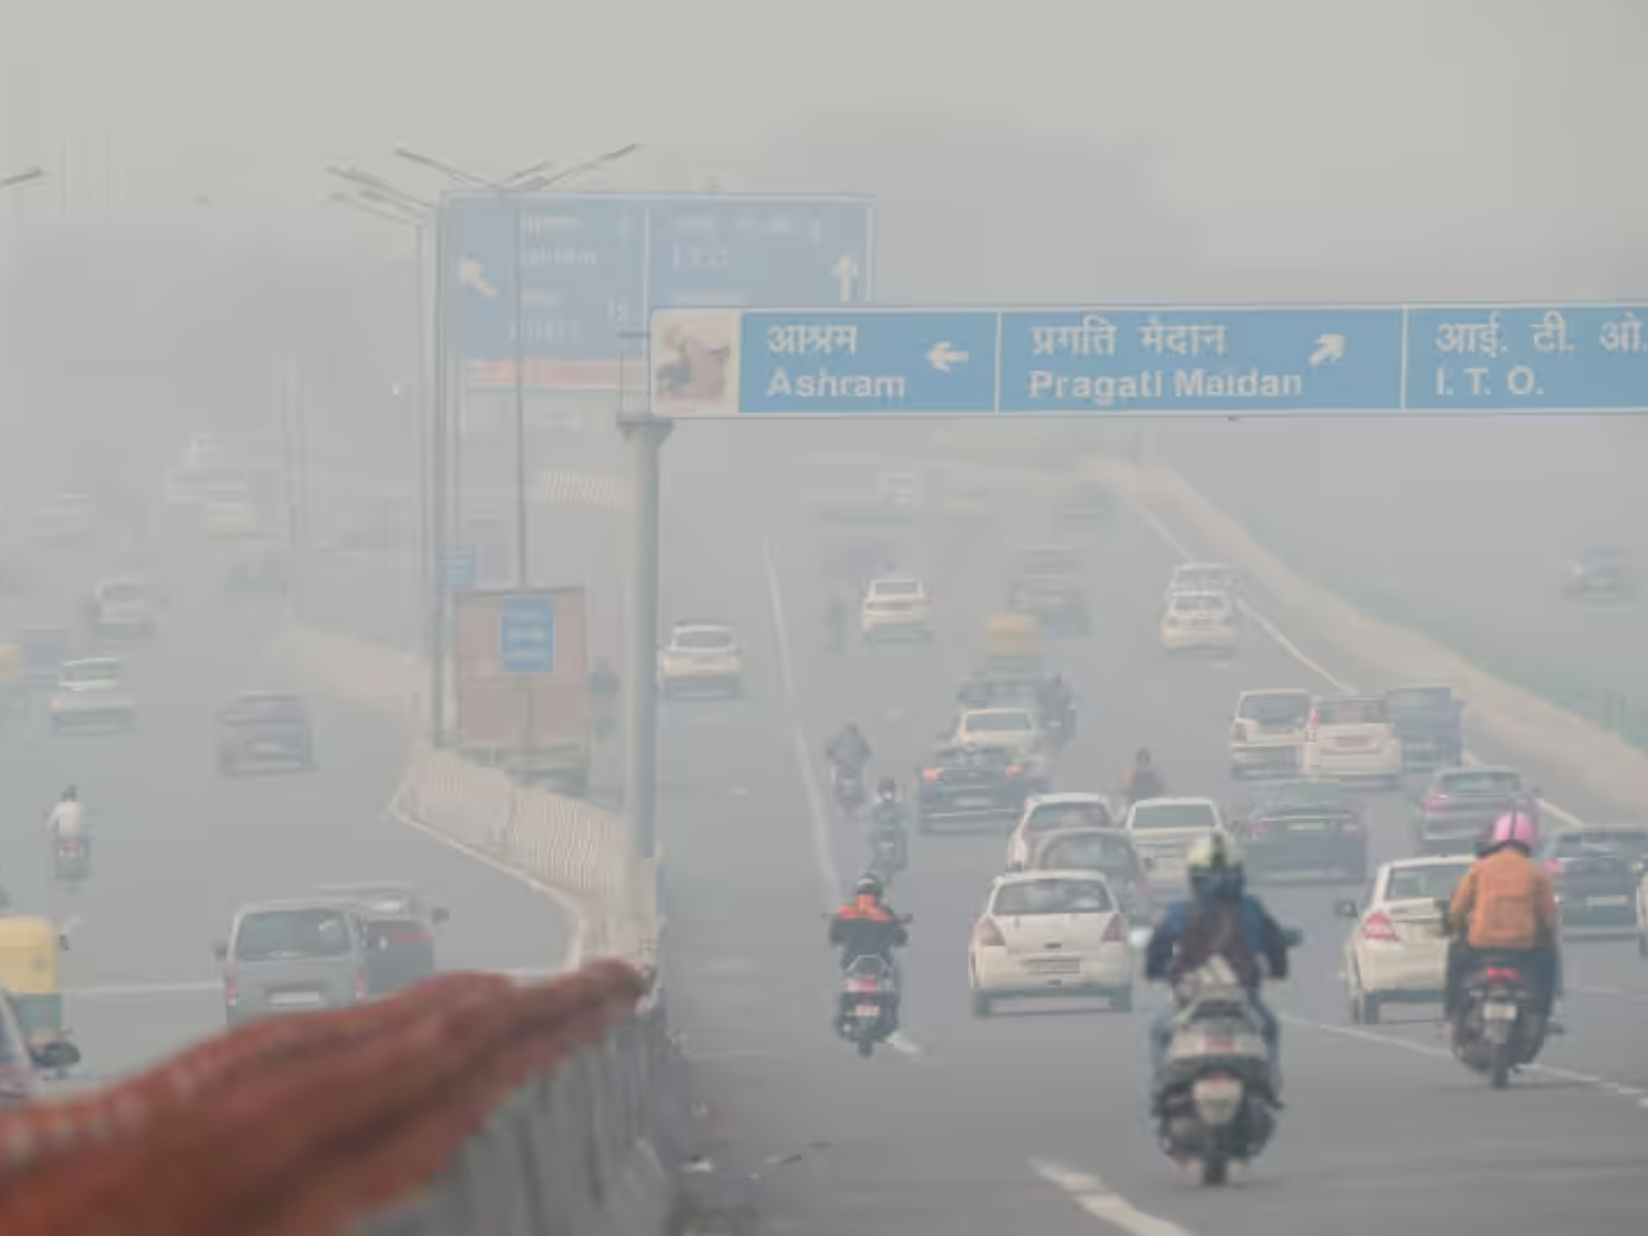 Delhi Air Pollution: After Diwali, Delhi Becomes the Most Polluted City in the World, Lahore-Karachi Also on the List